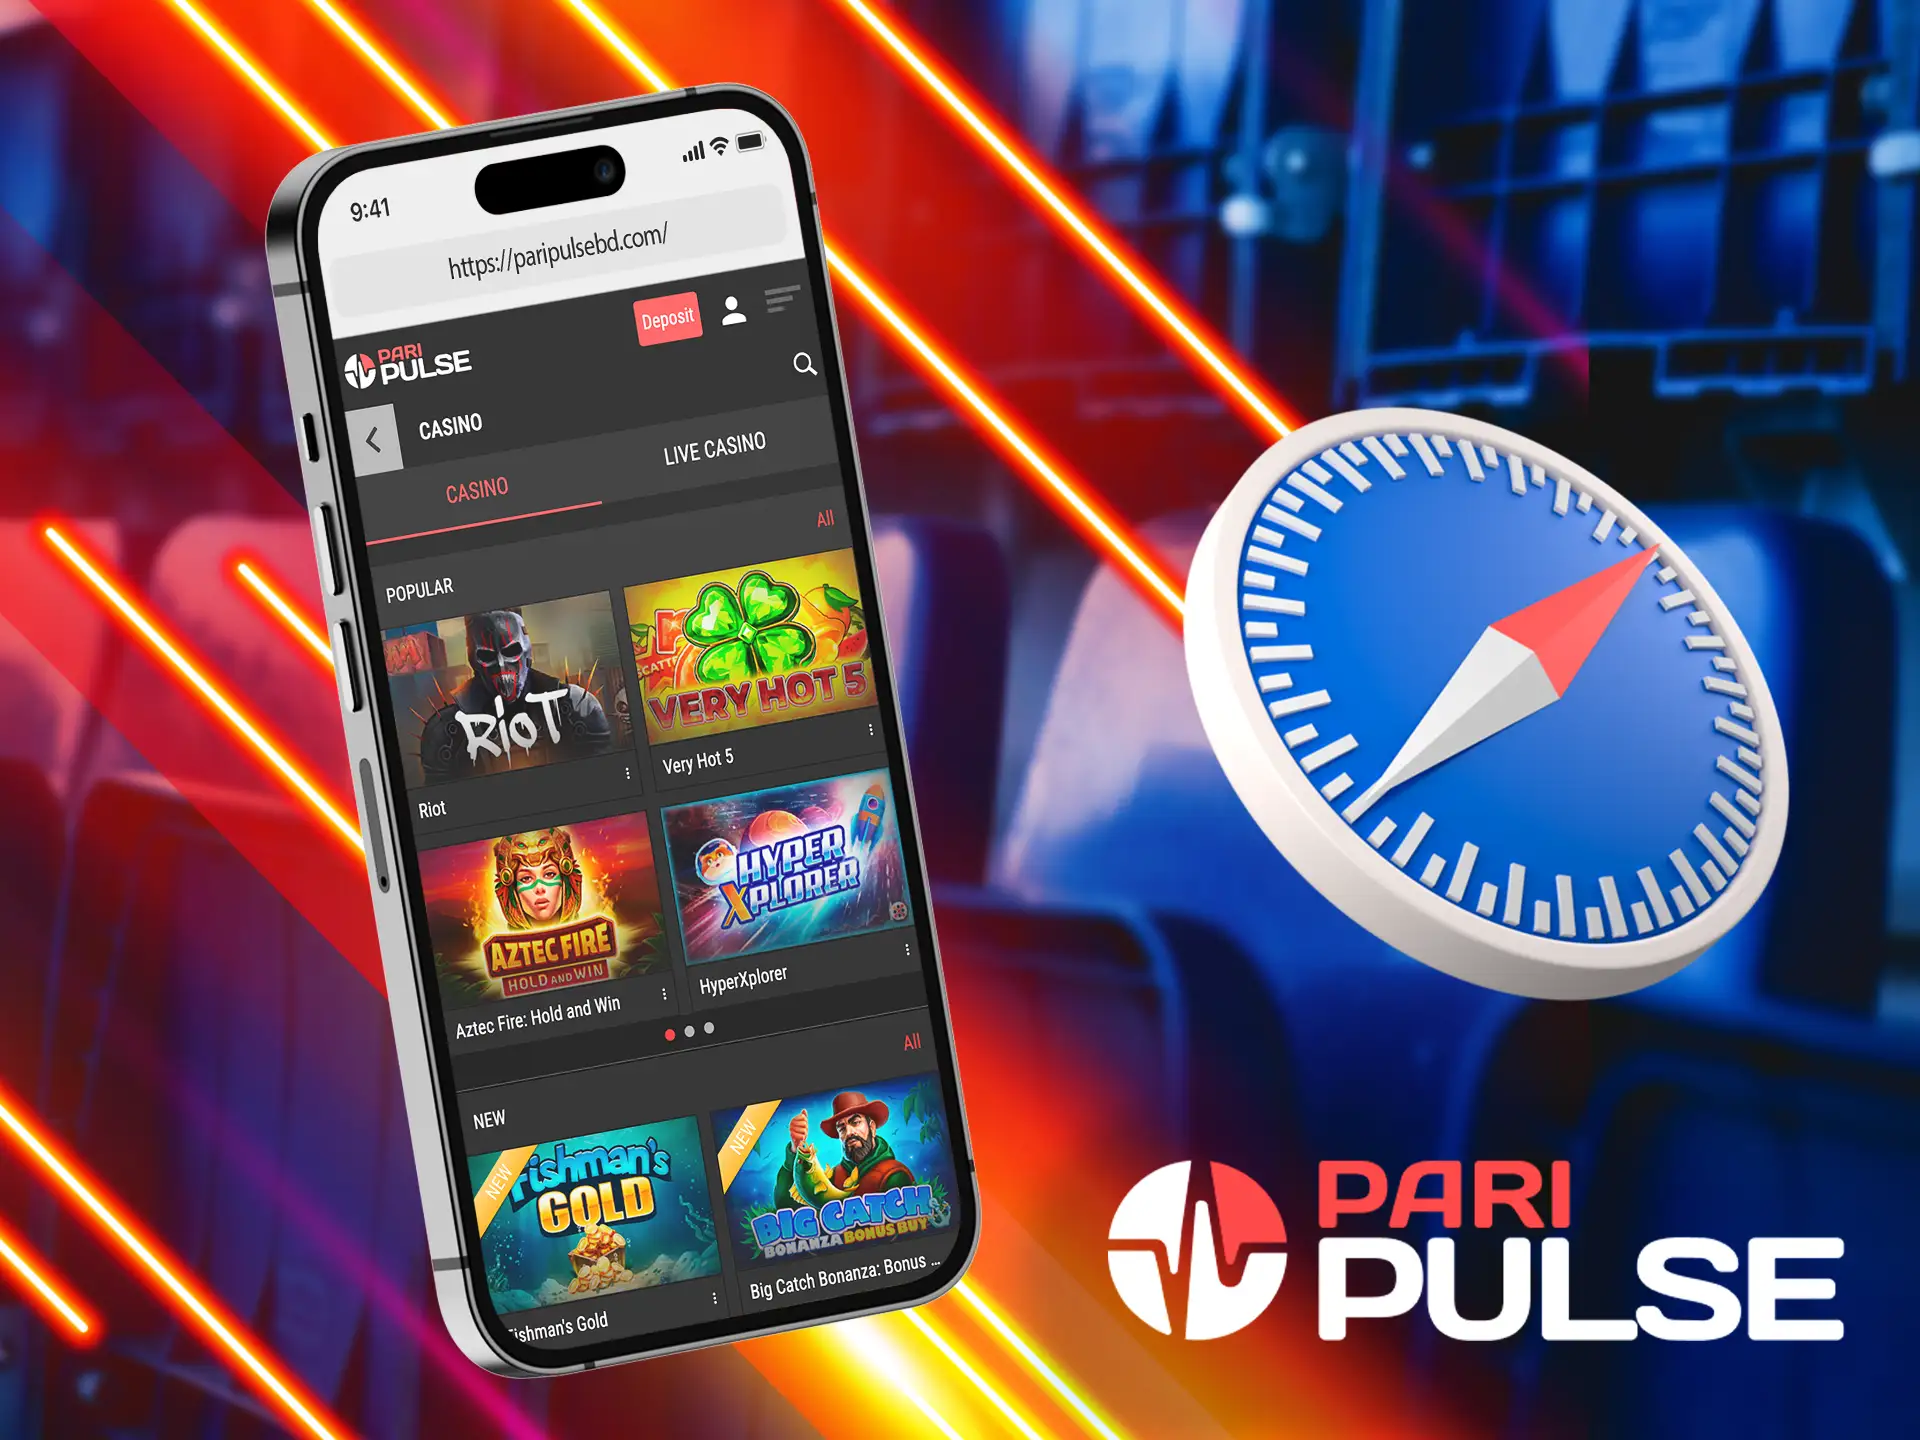 If you can't install the PariPulse software for whatever reason, this special version of the app will help you, it's compatible with most devices.